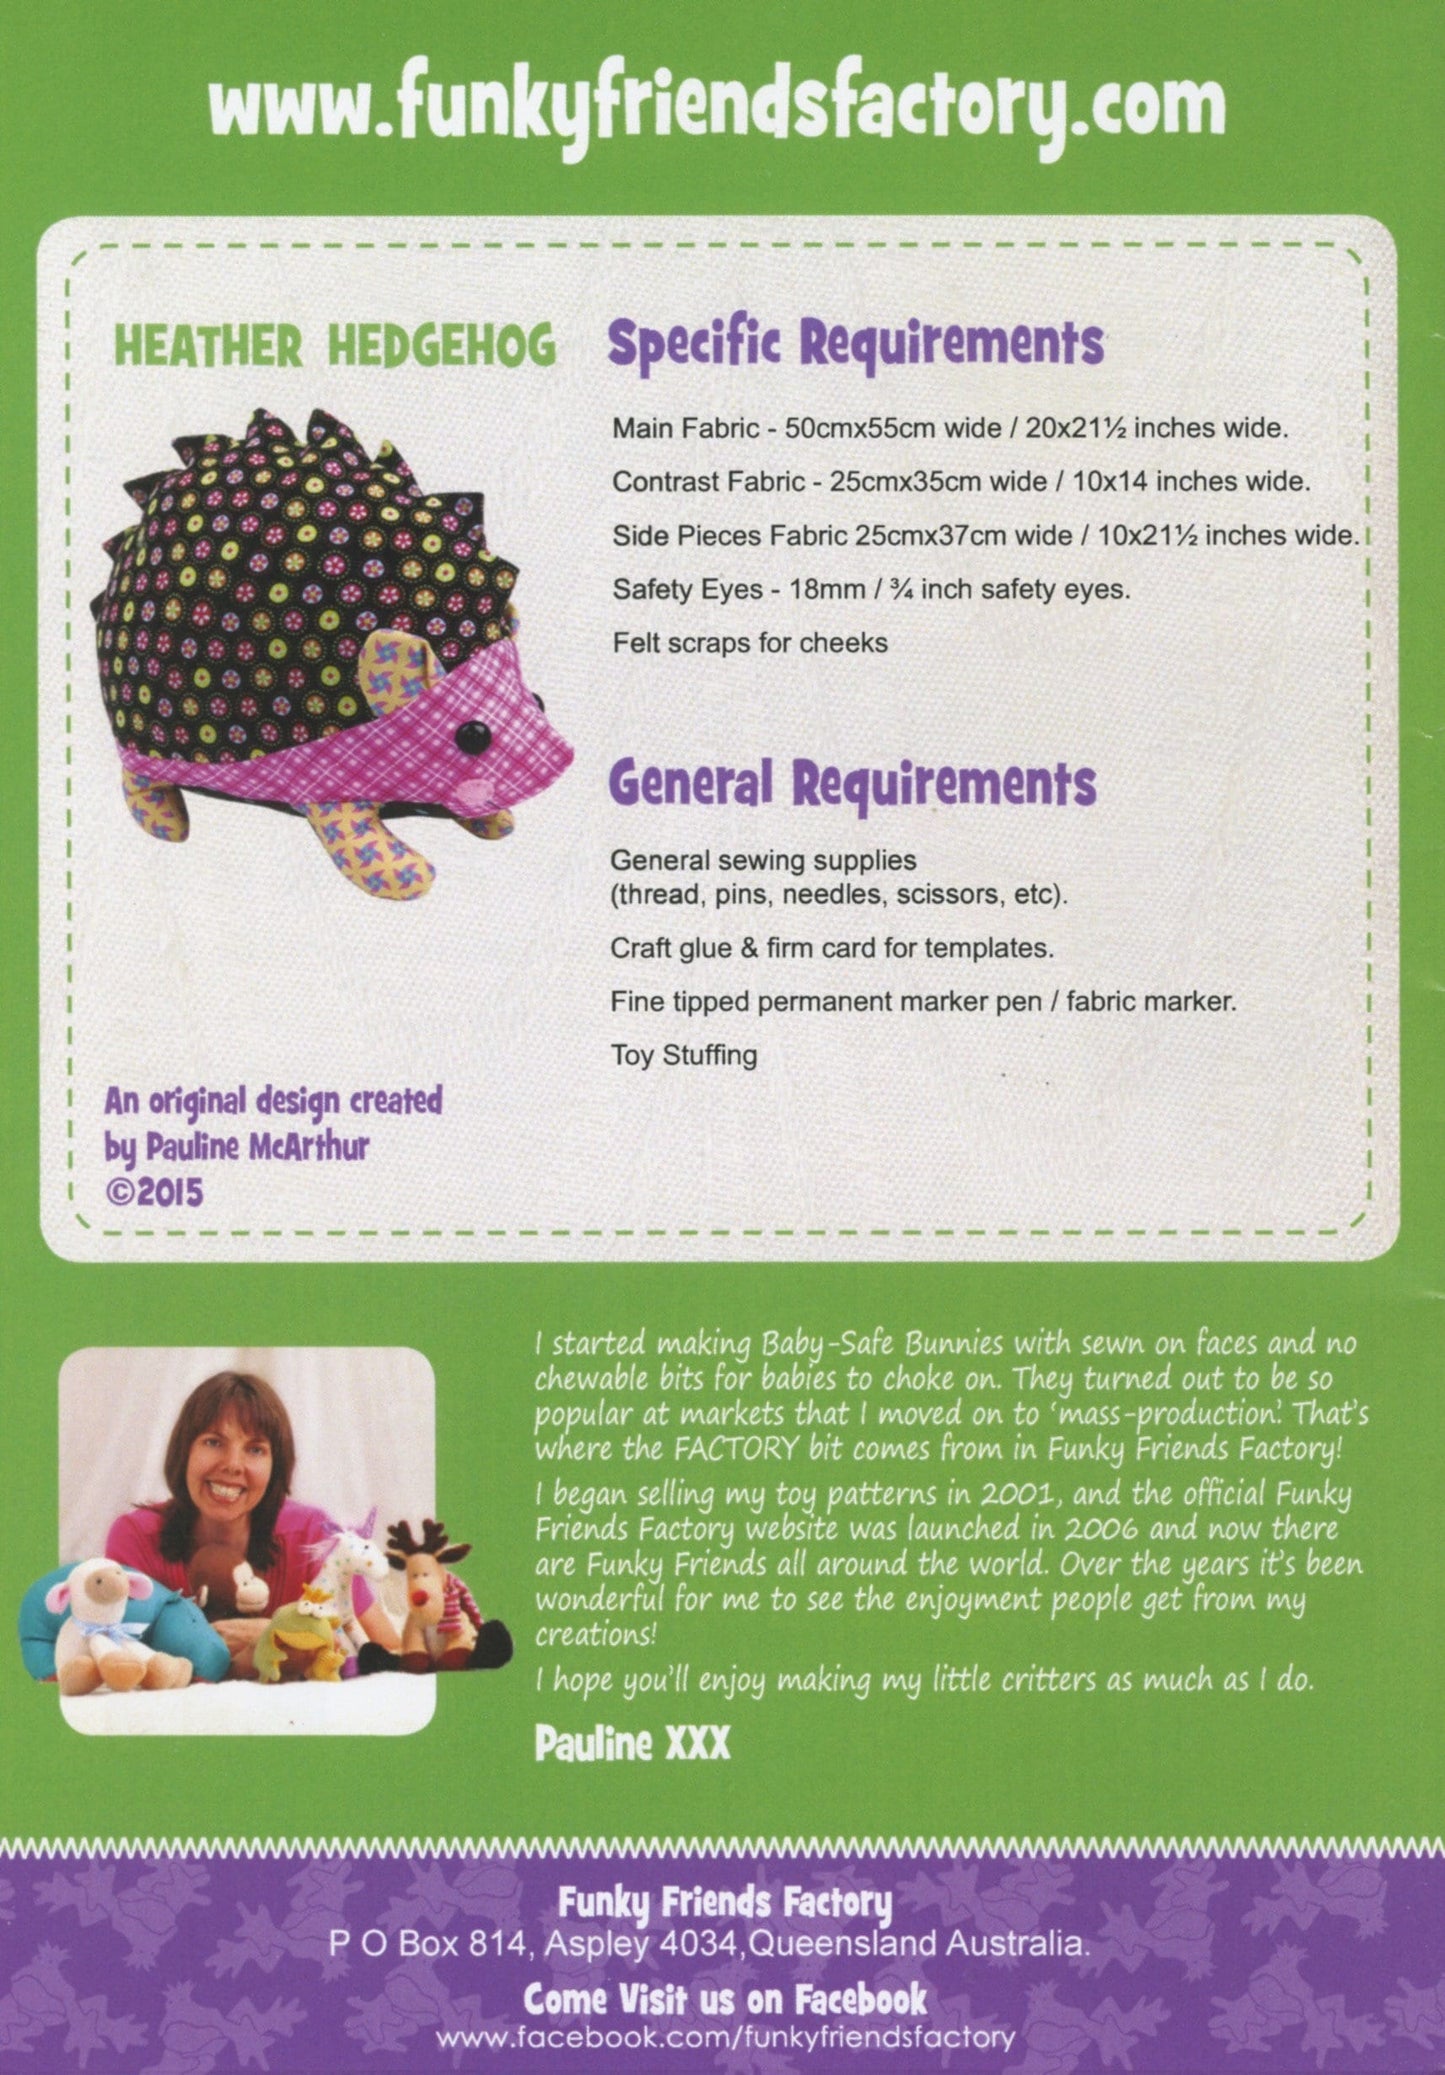 Hannah the Hedgehog pattern by Funky Friends Factory